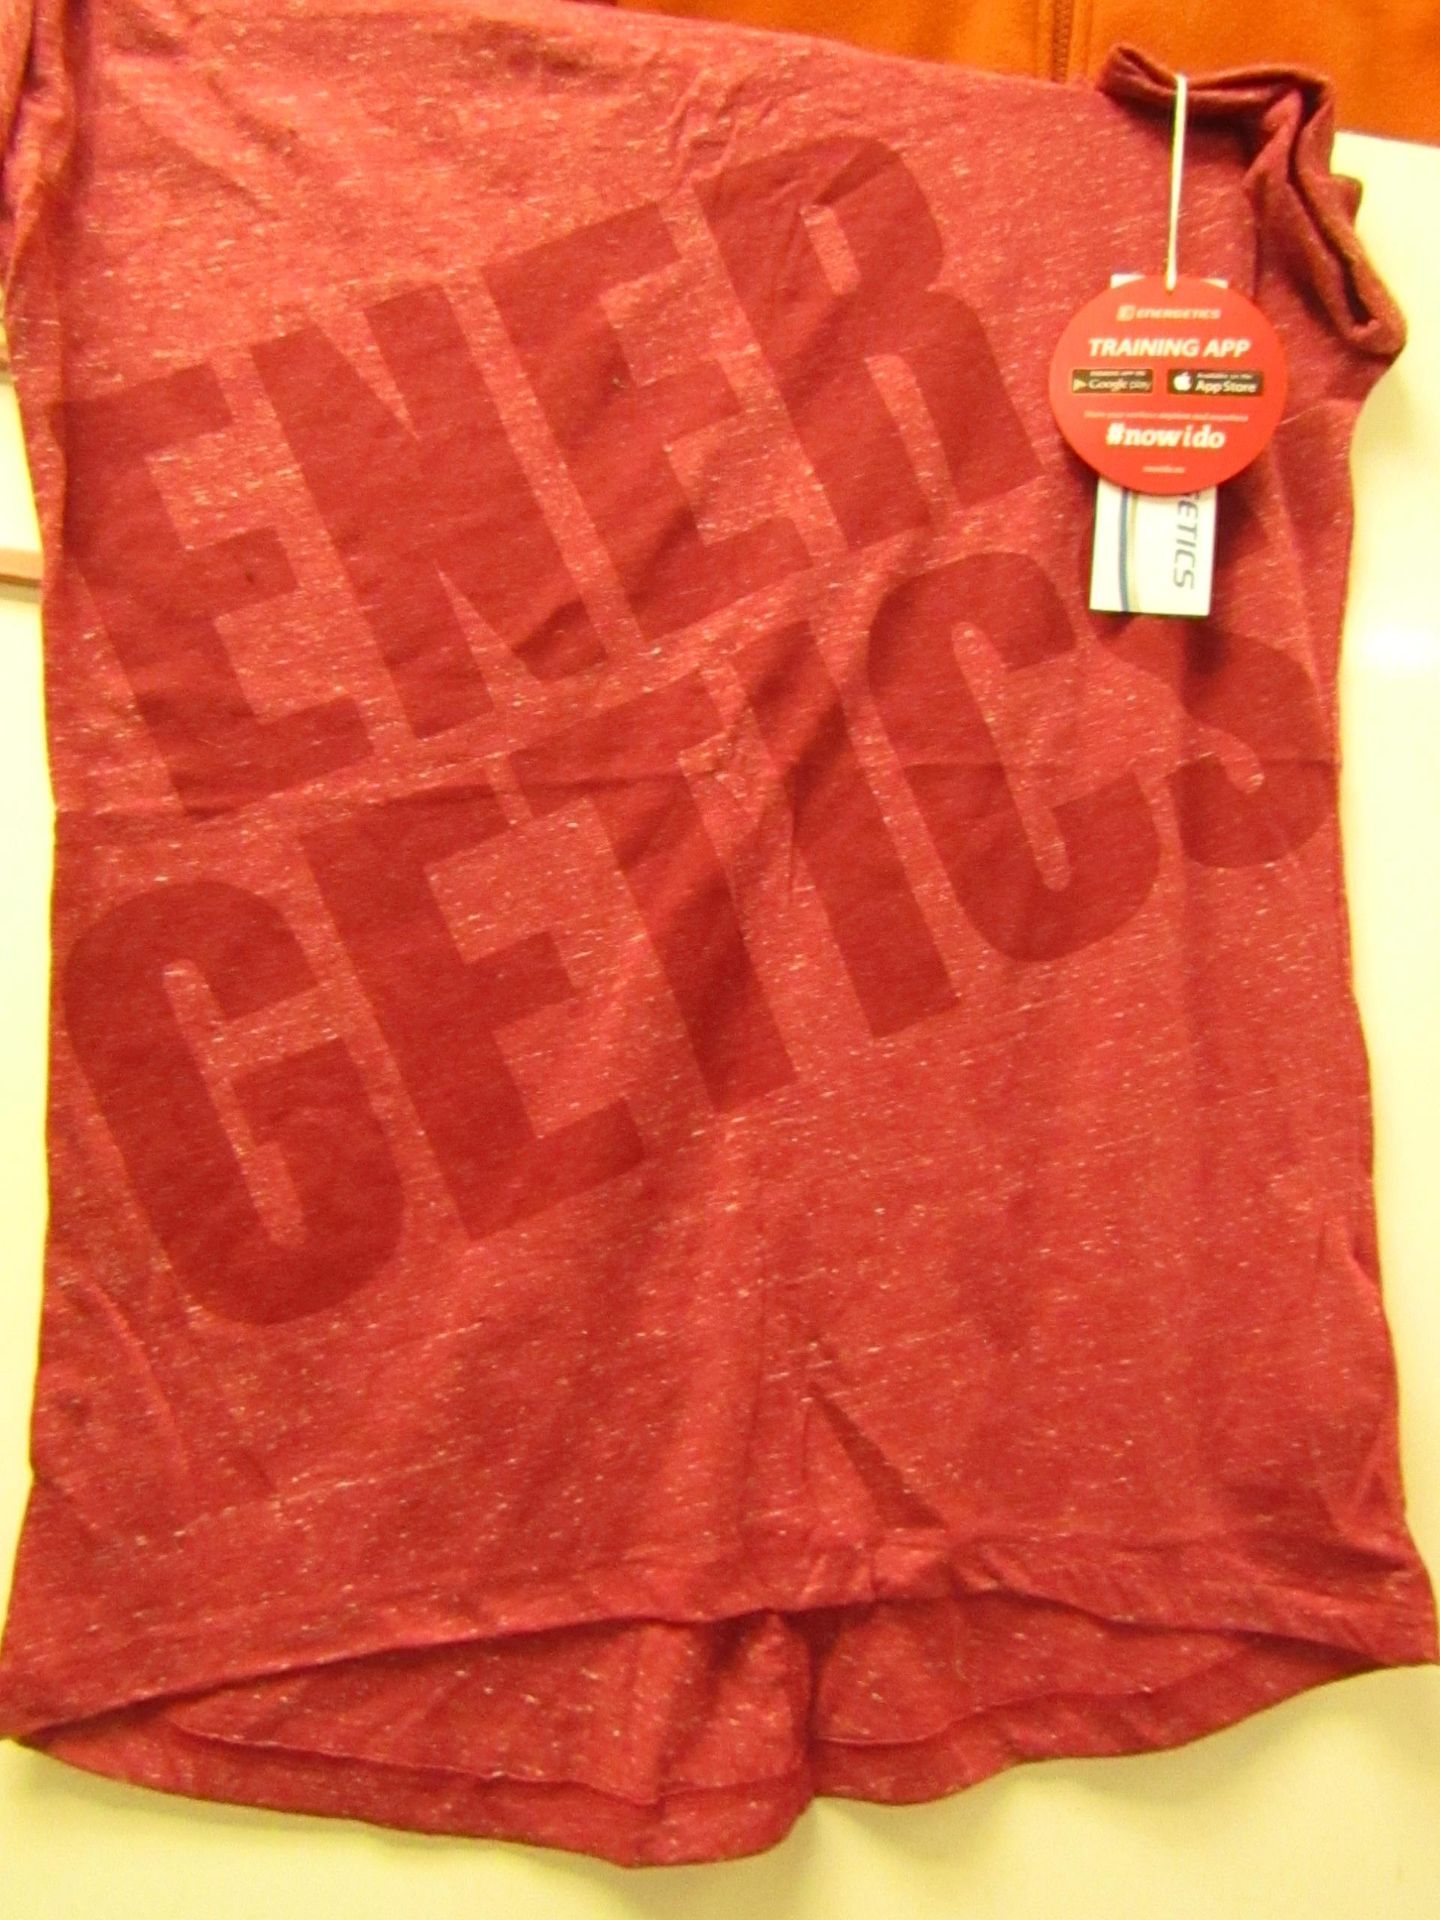 5X Energetics T-shirt size 10 all new with tags and packaged see image for design